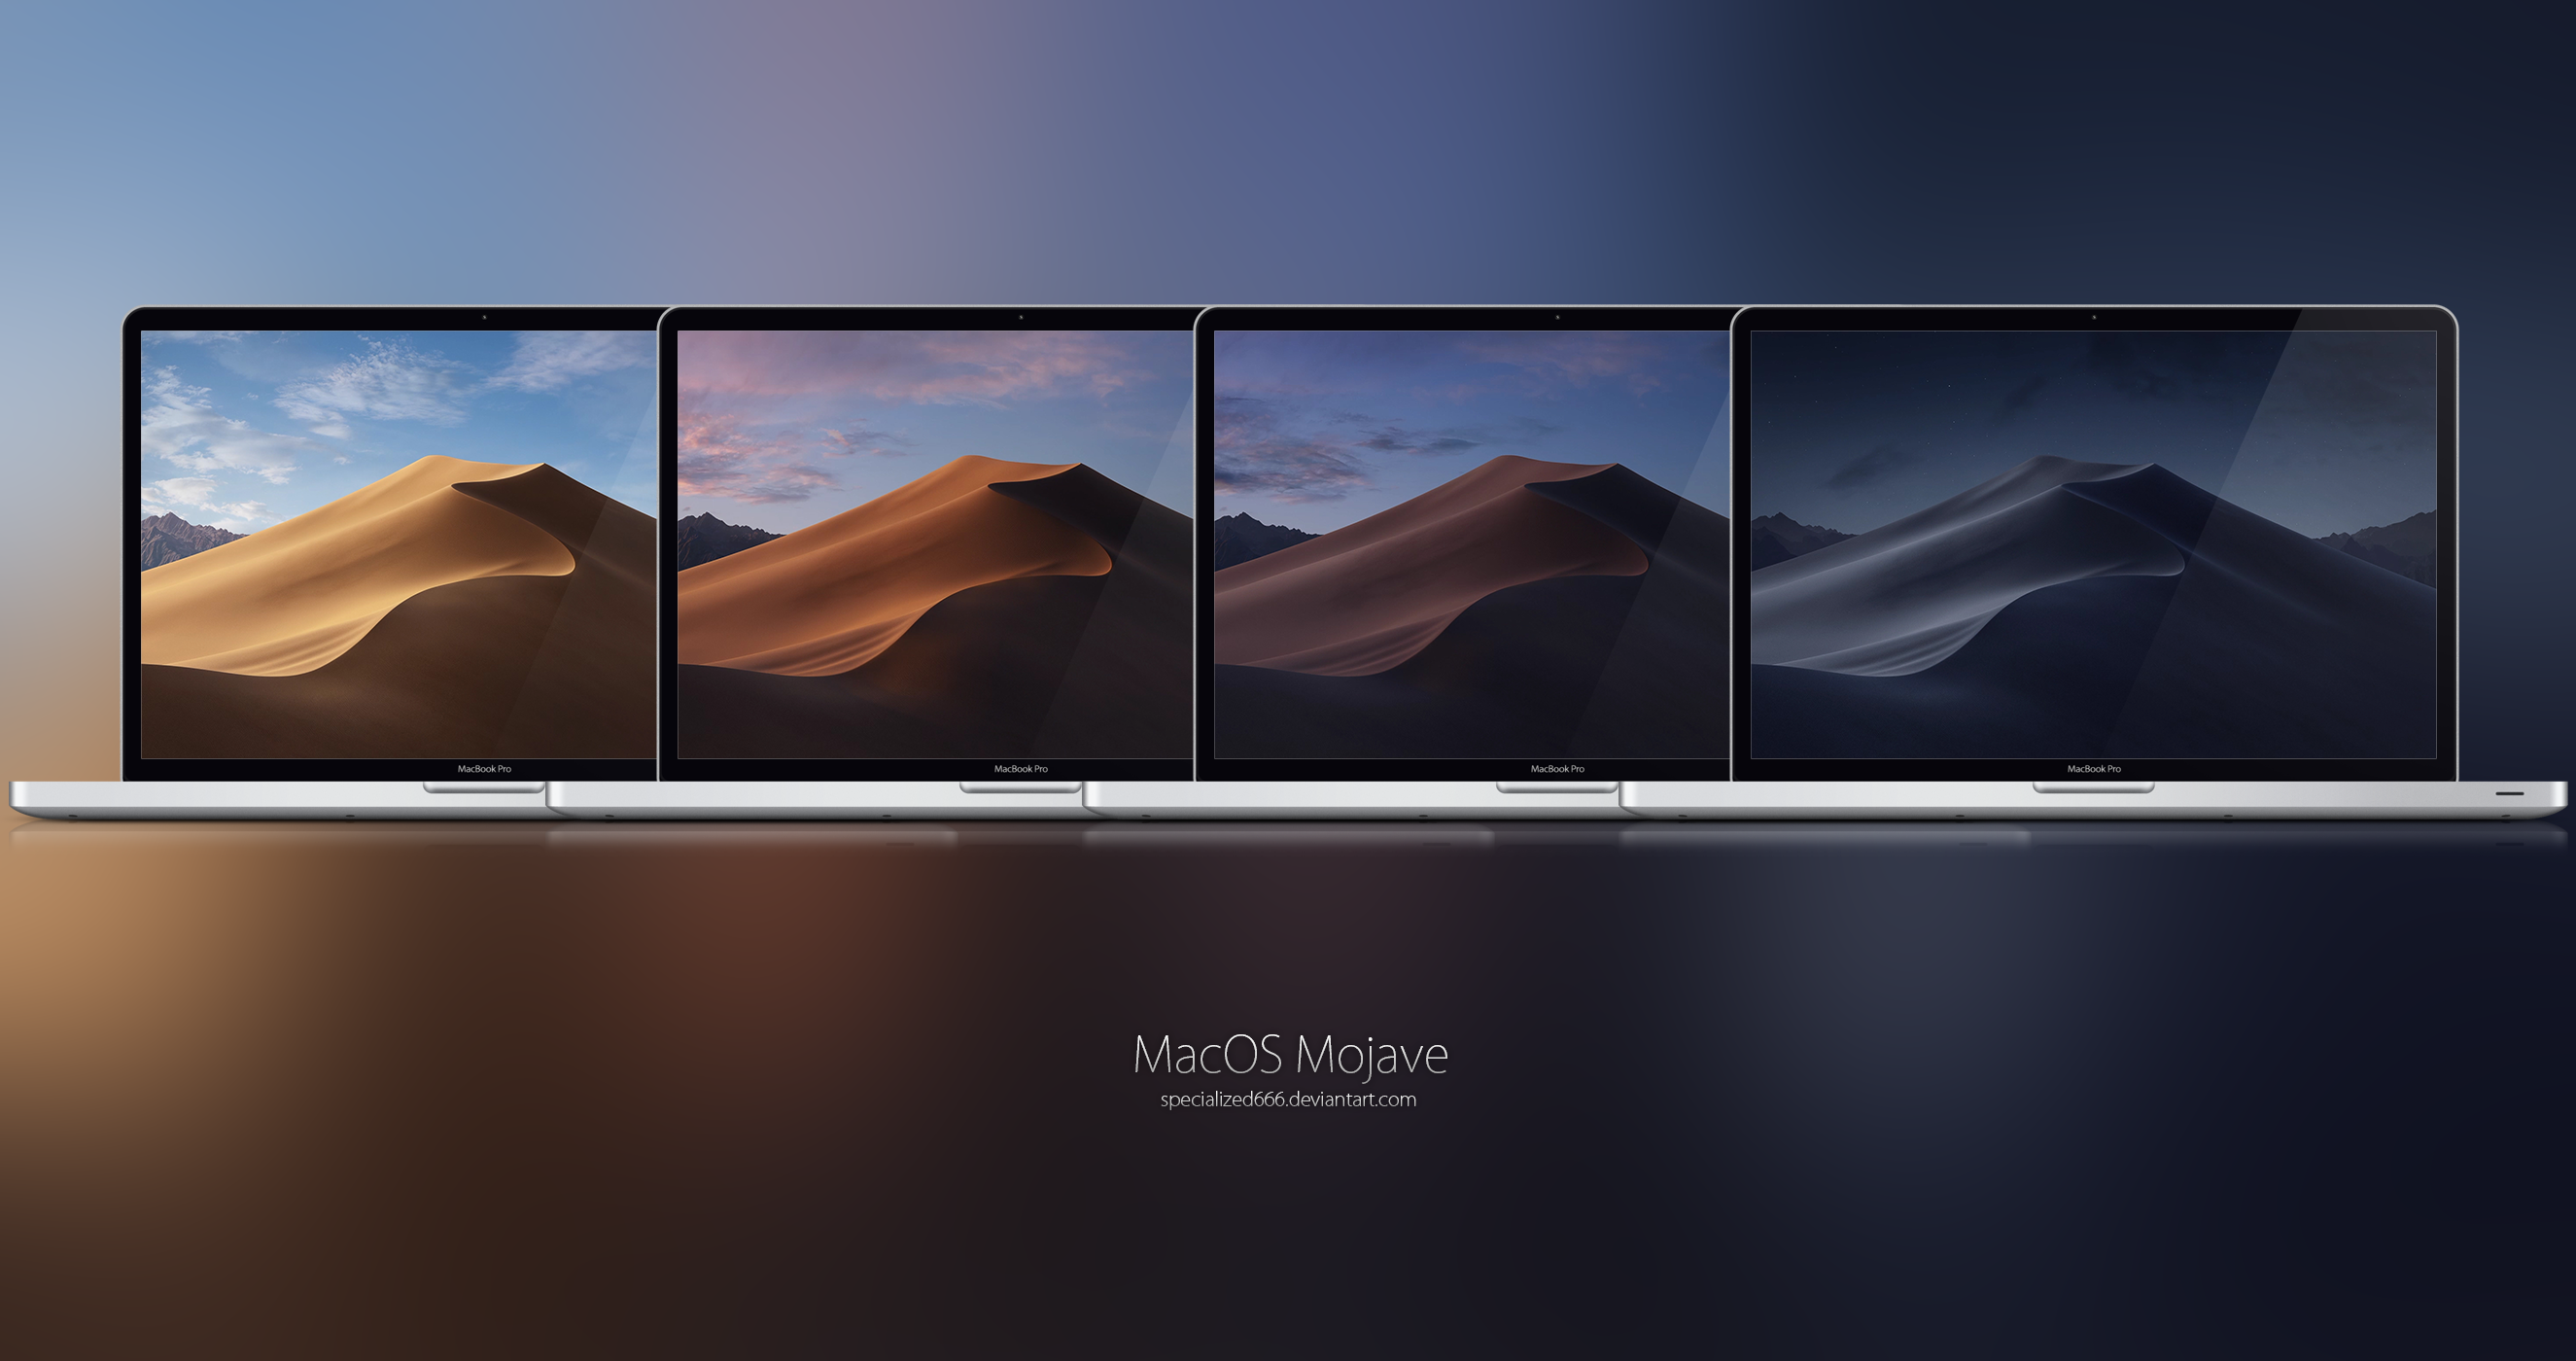 Macos Mojave By Specialized666